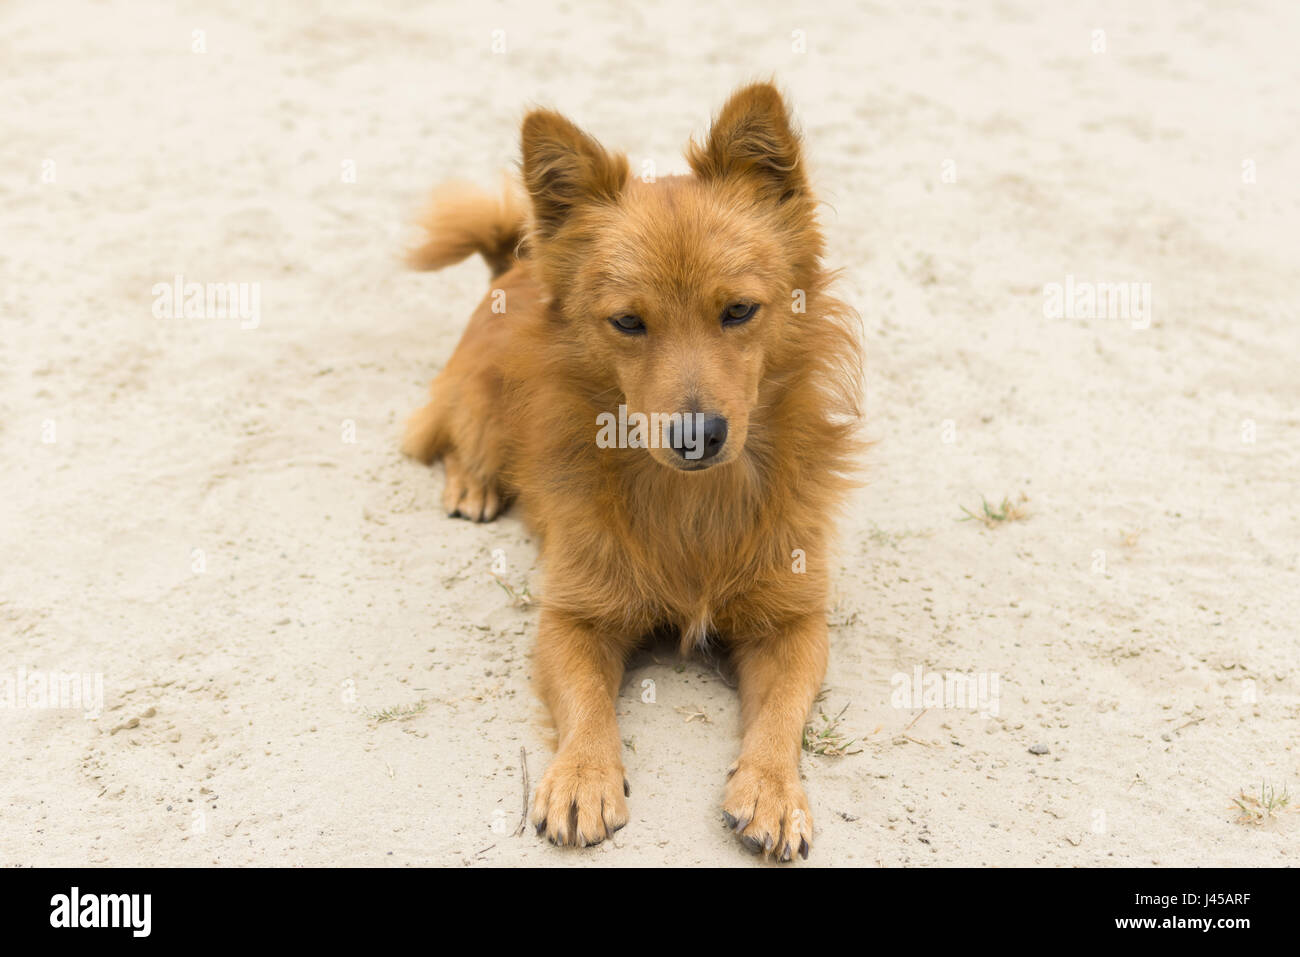 Portrait of cute mixed breed dog lying on a sandy surface with no interest Stock Photo